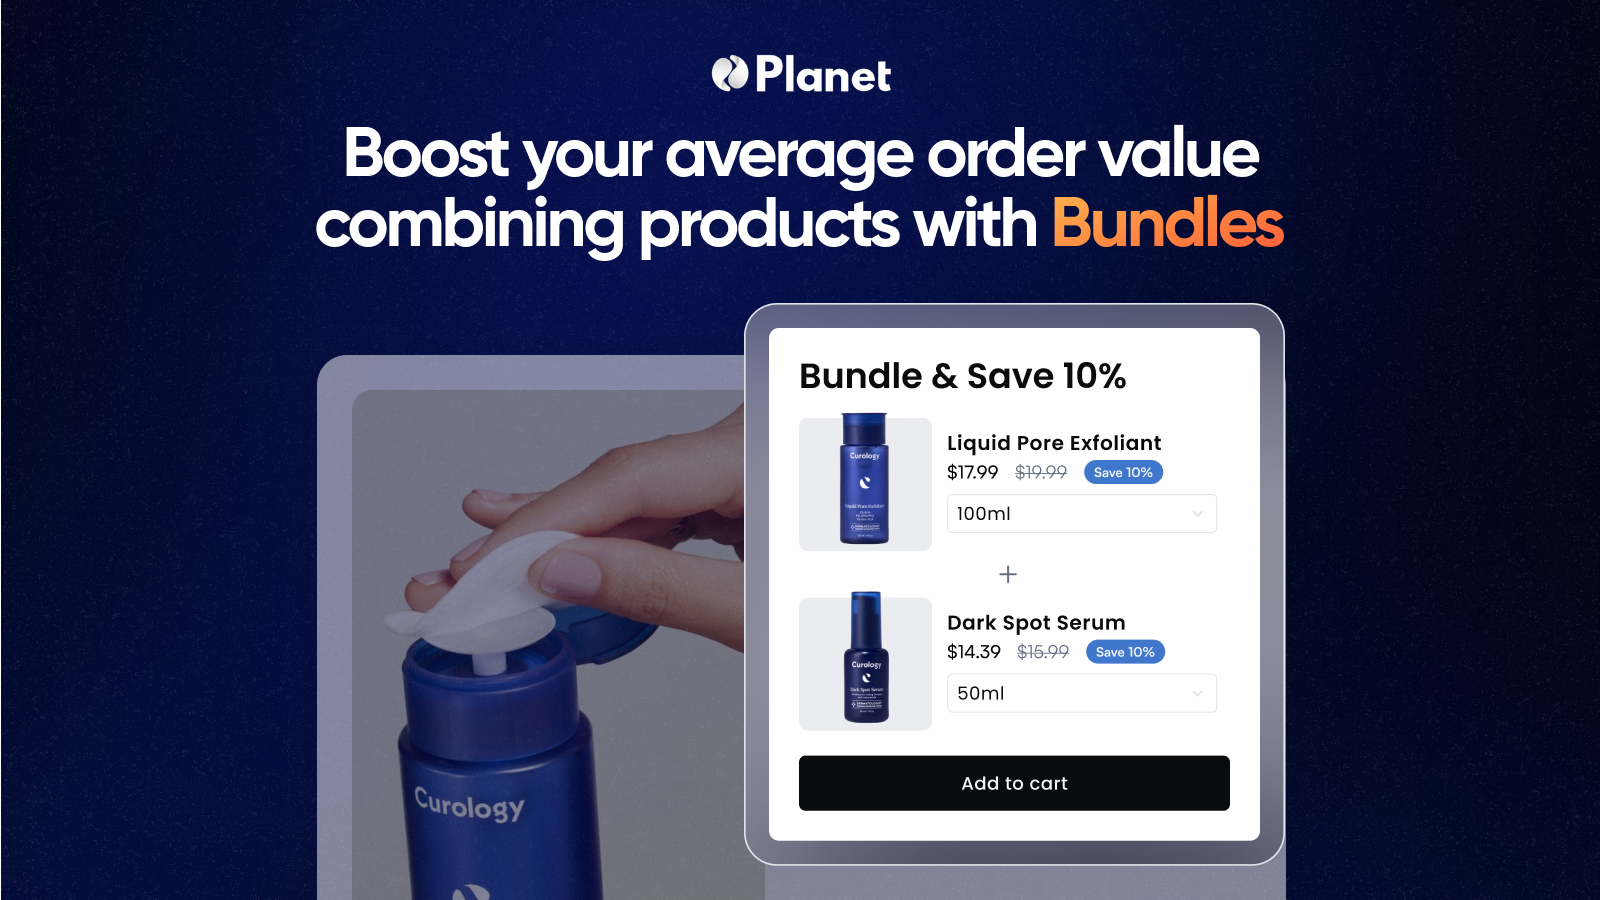 Boost your average order value with bundles